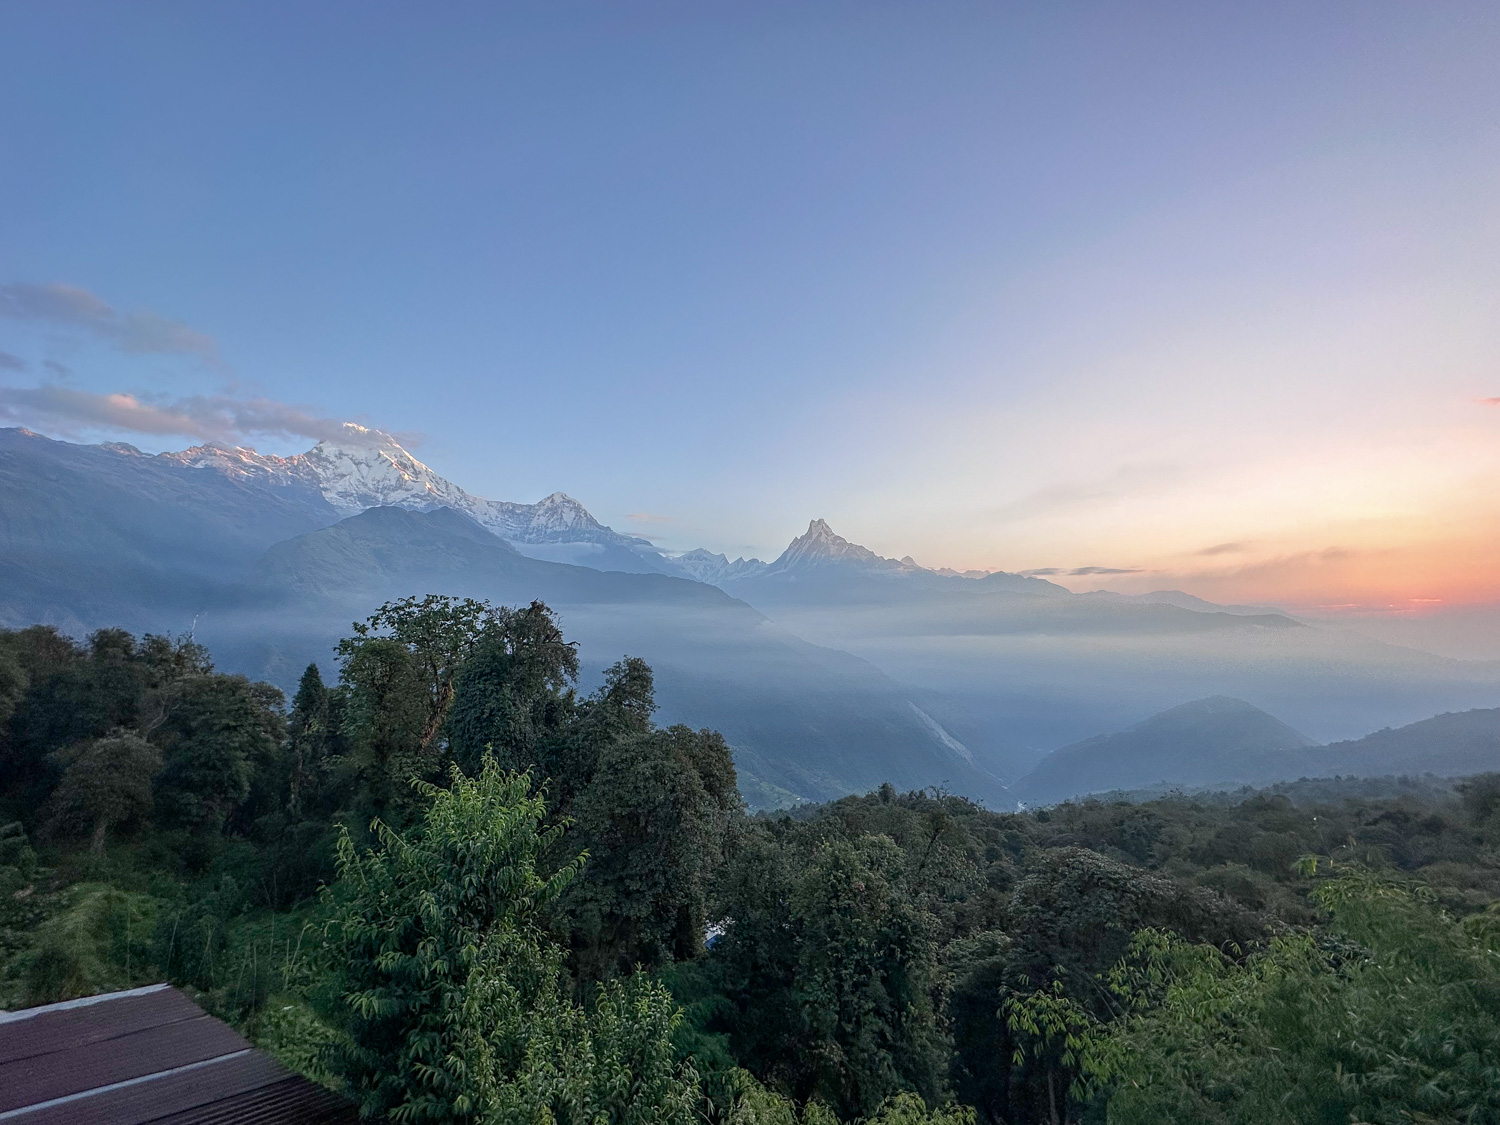 Sunrise over the Himalayas during October